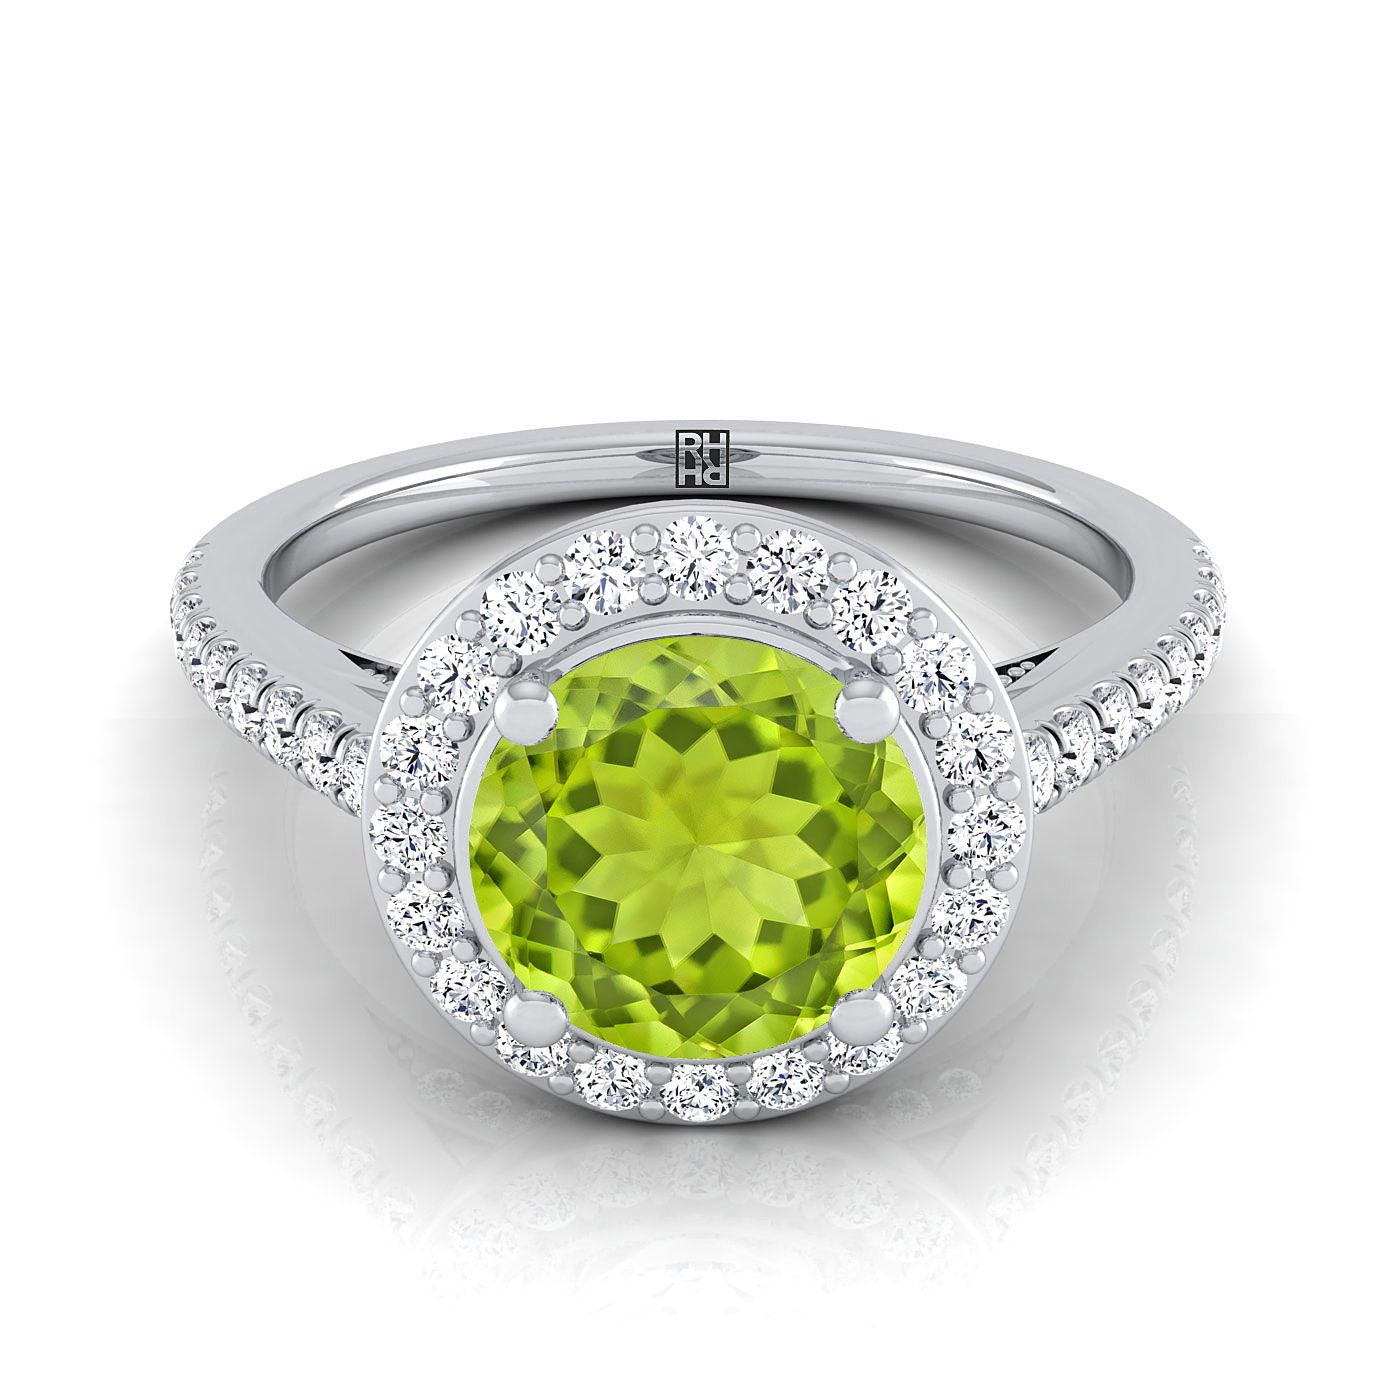 18K White Gold Round Brilliant Peridot French Pave Halo Secret Gallery Diamond Engagement Ring -3/8ctw